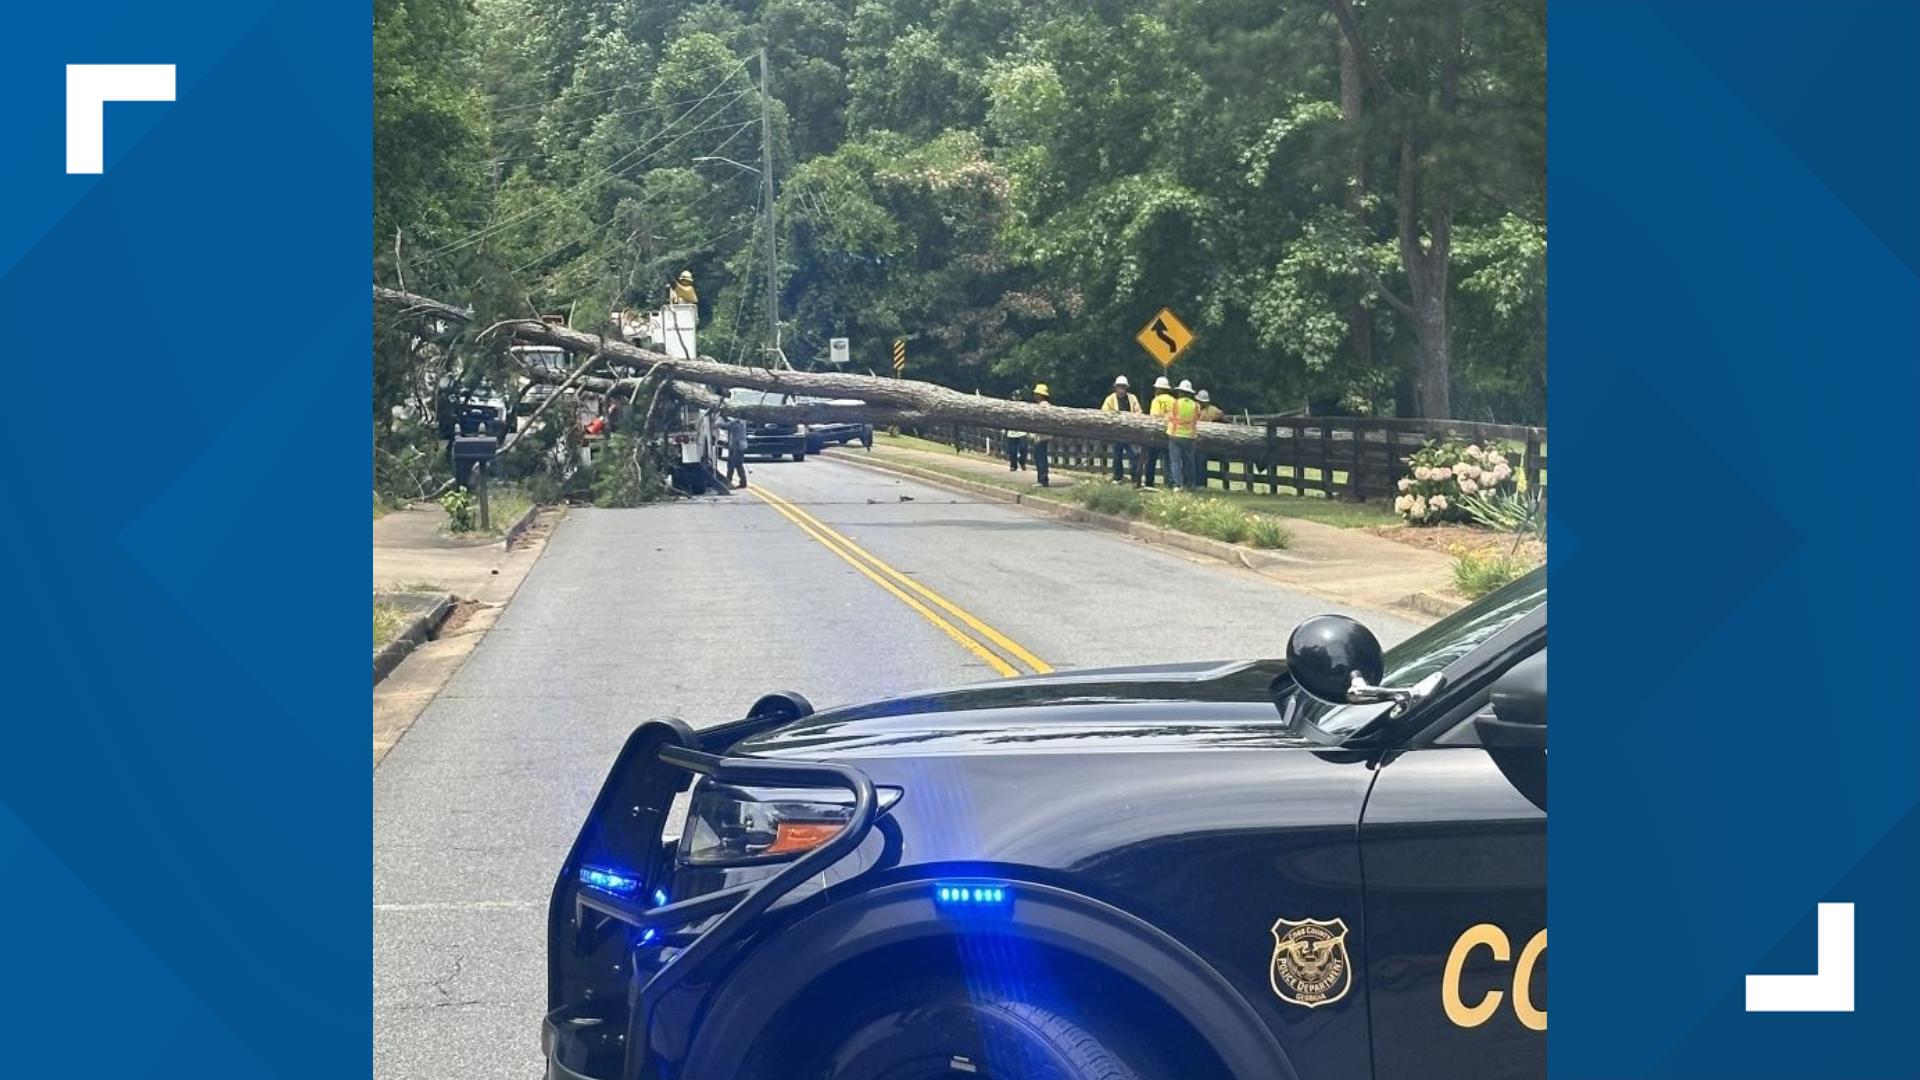 Cobb County Police posted on social media that Blackwell Road is closed between Carter Valley Drive and Knight Road.